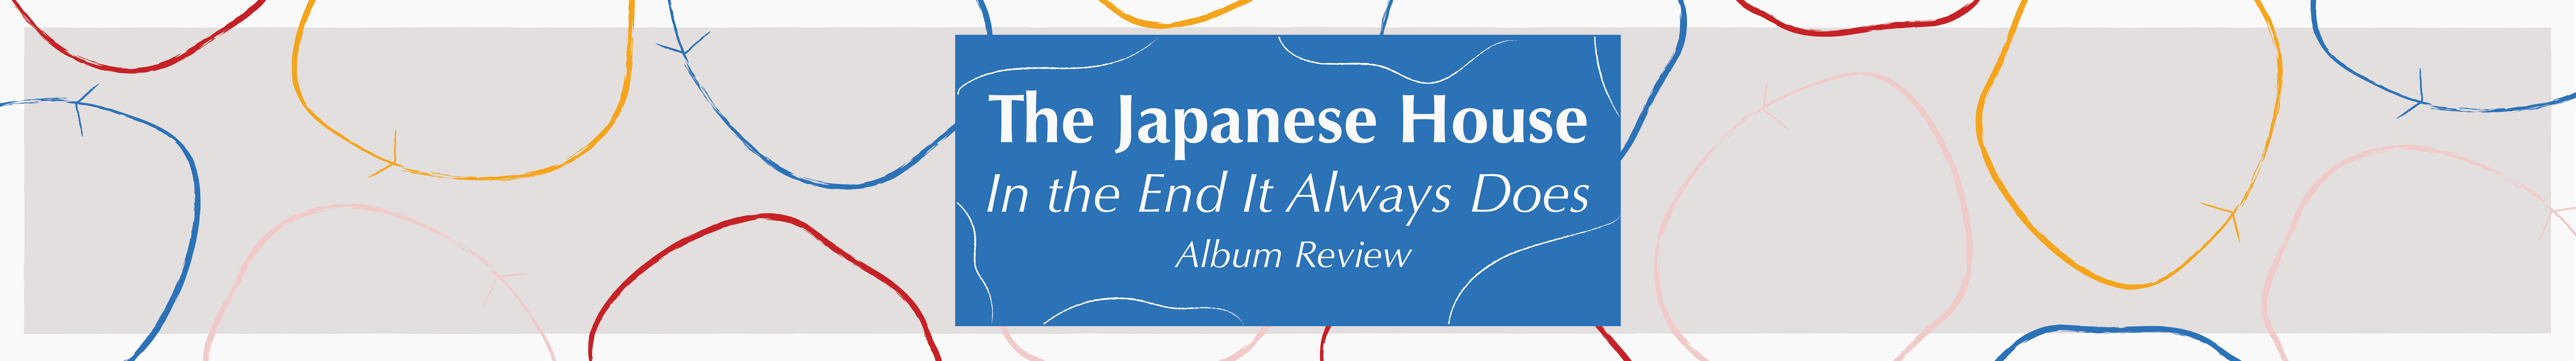 Album Review, The Japanese House, "In the End It Always Does"